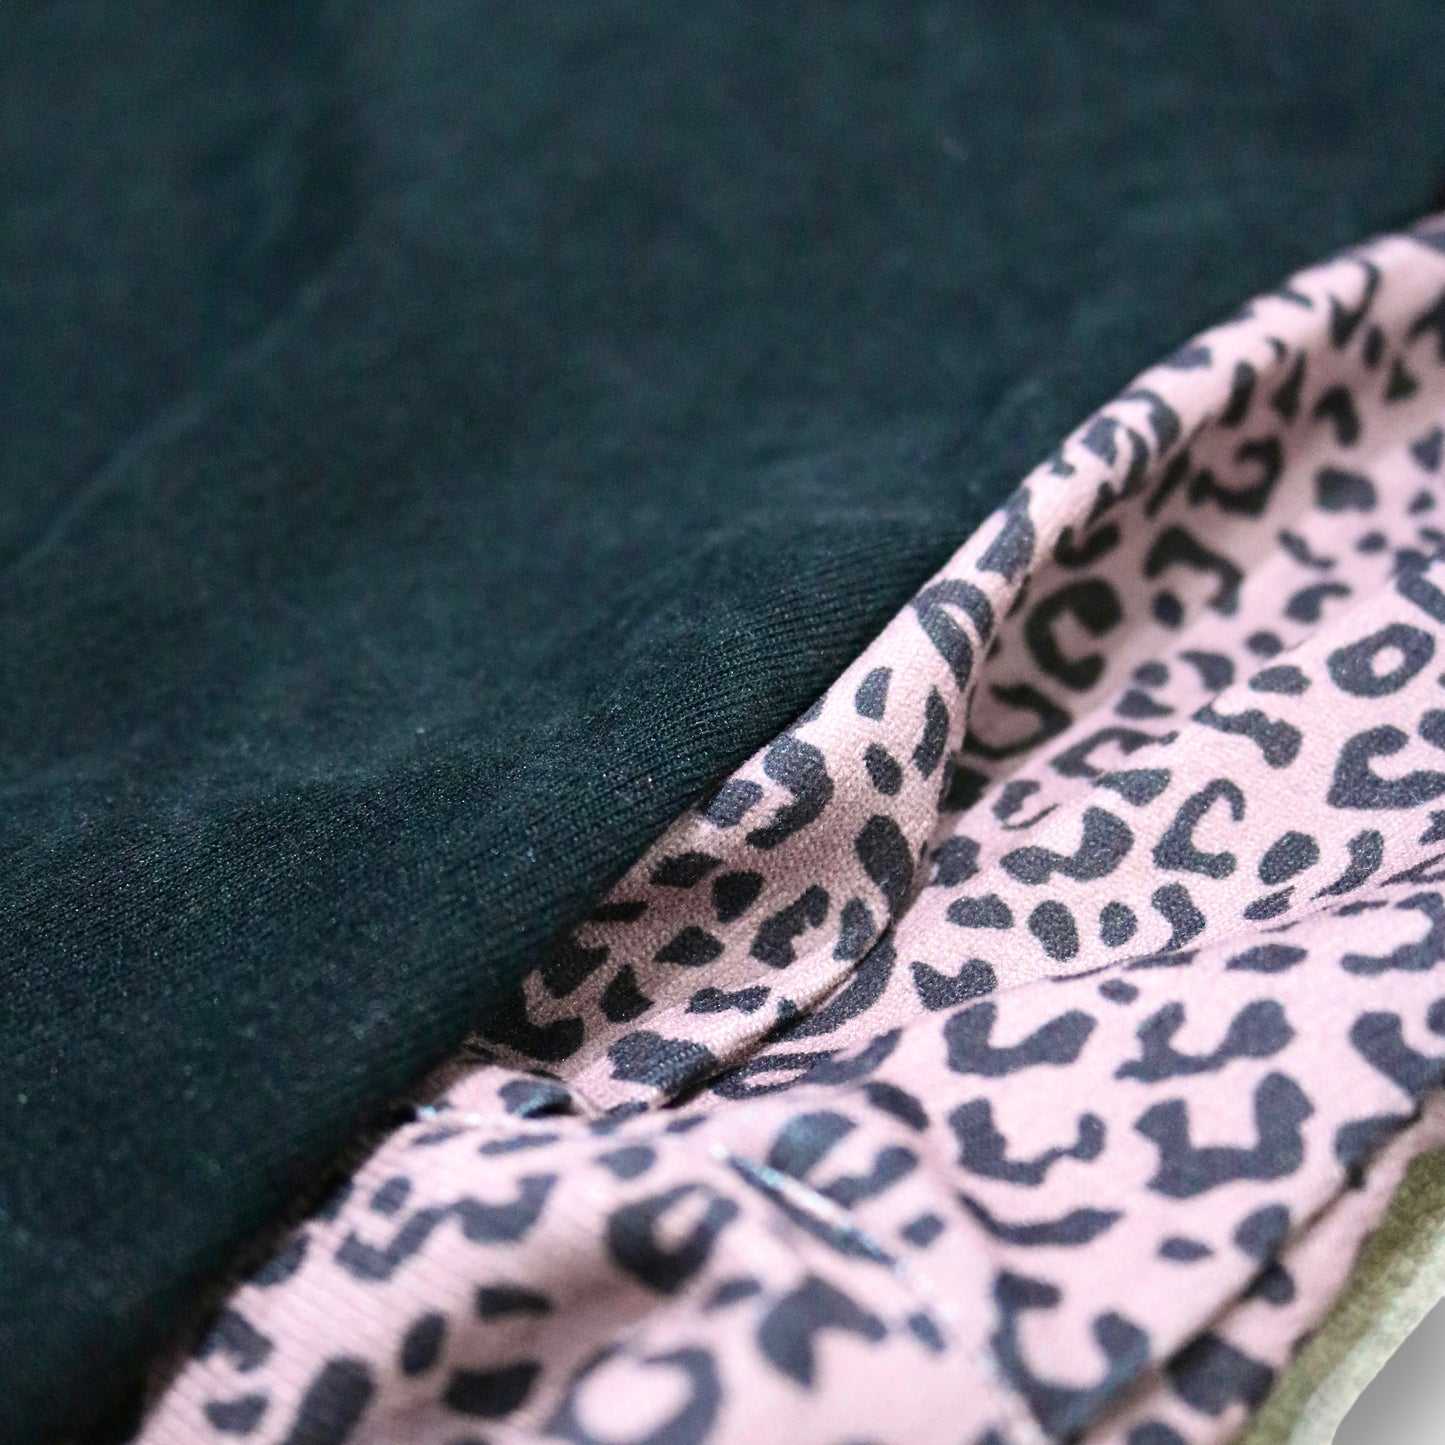 Fake suede leopard switching shirt